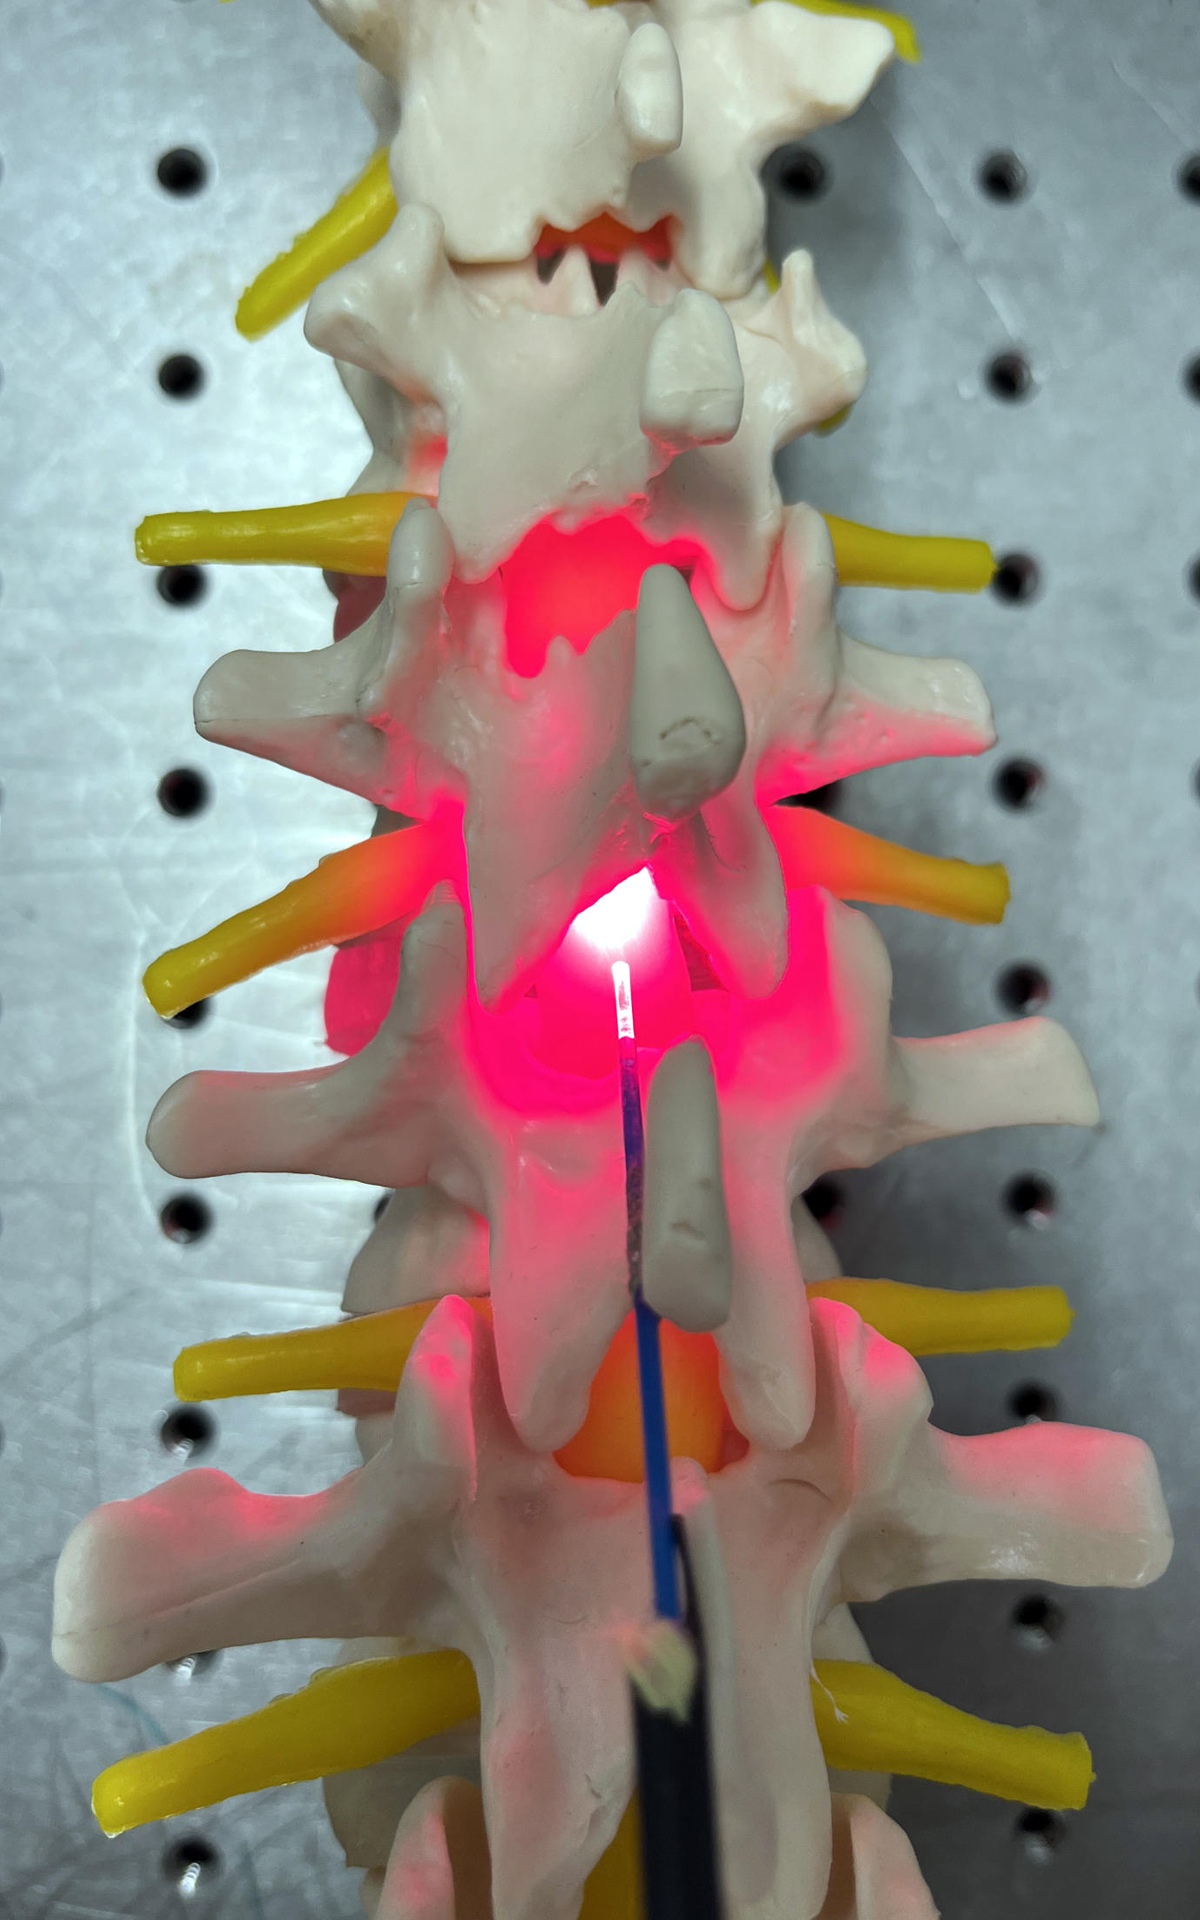 Mock-up of device showing positioning in spinal column